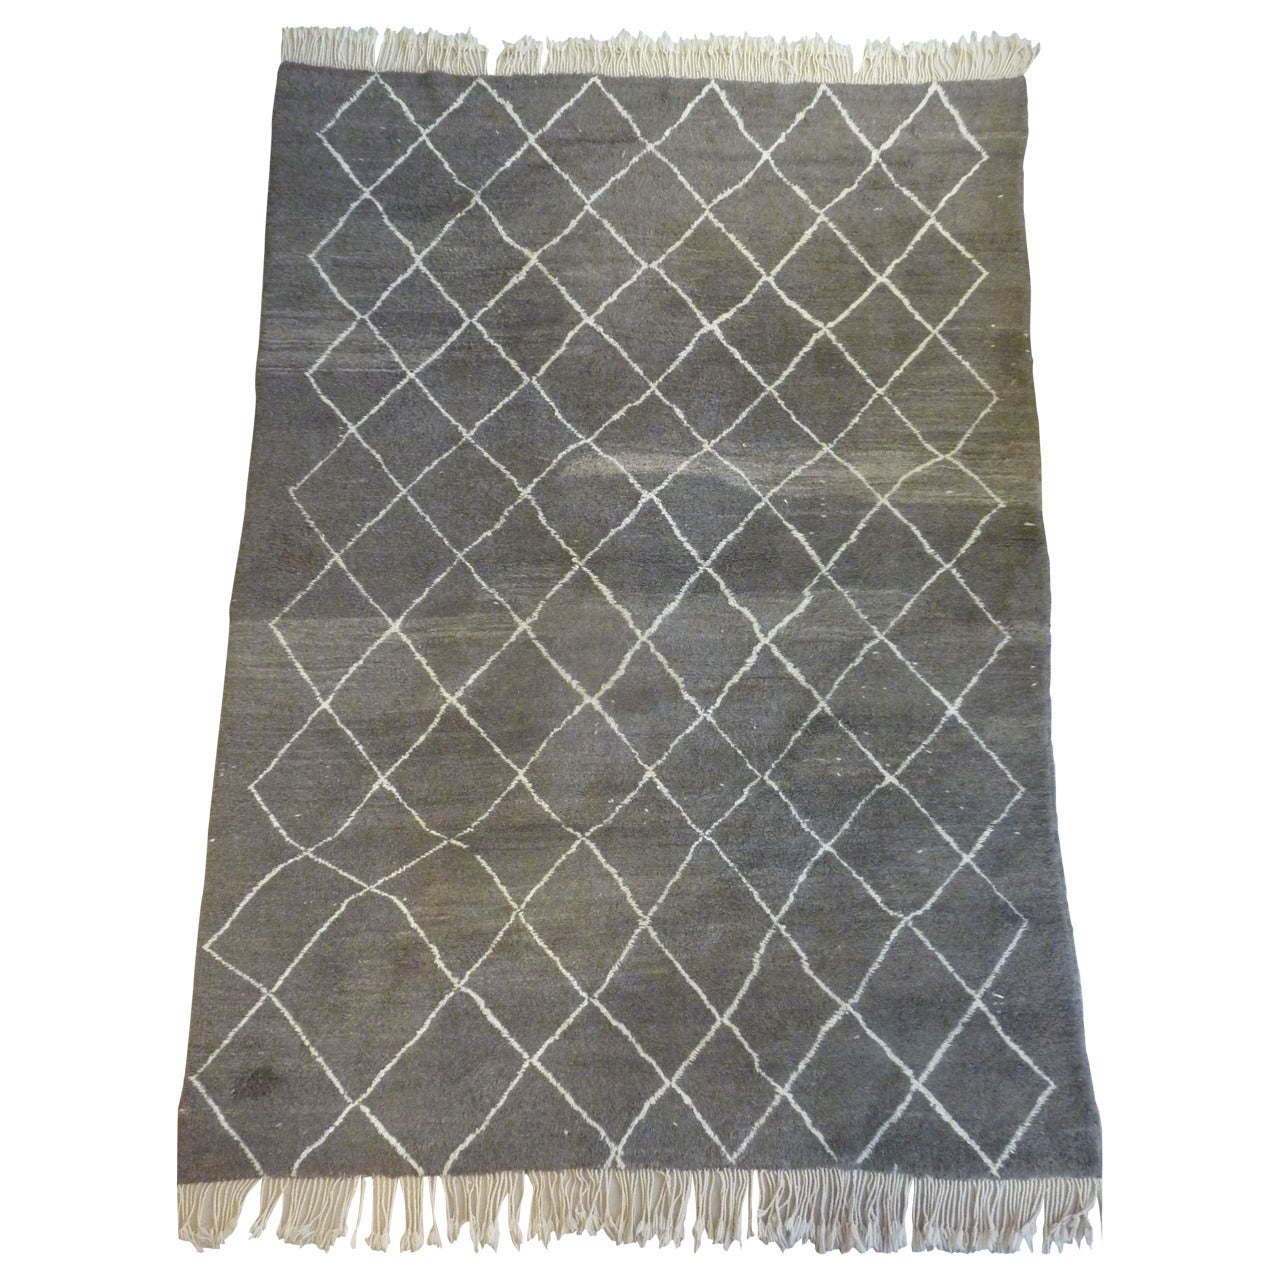 Warm Taupe Color Moroccan Rug from the 1950s